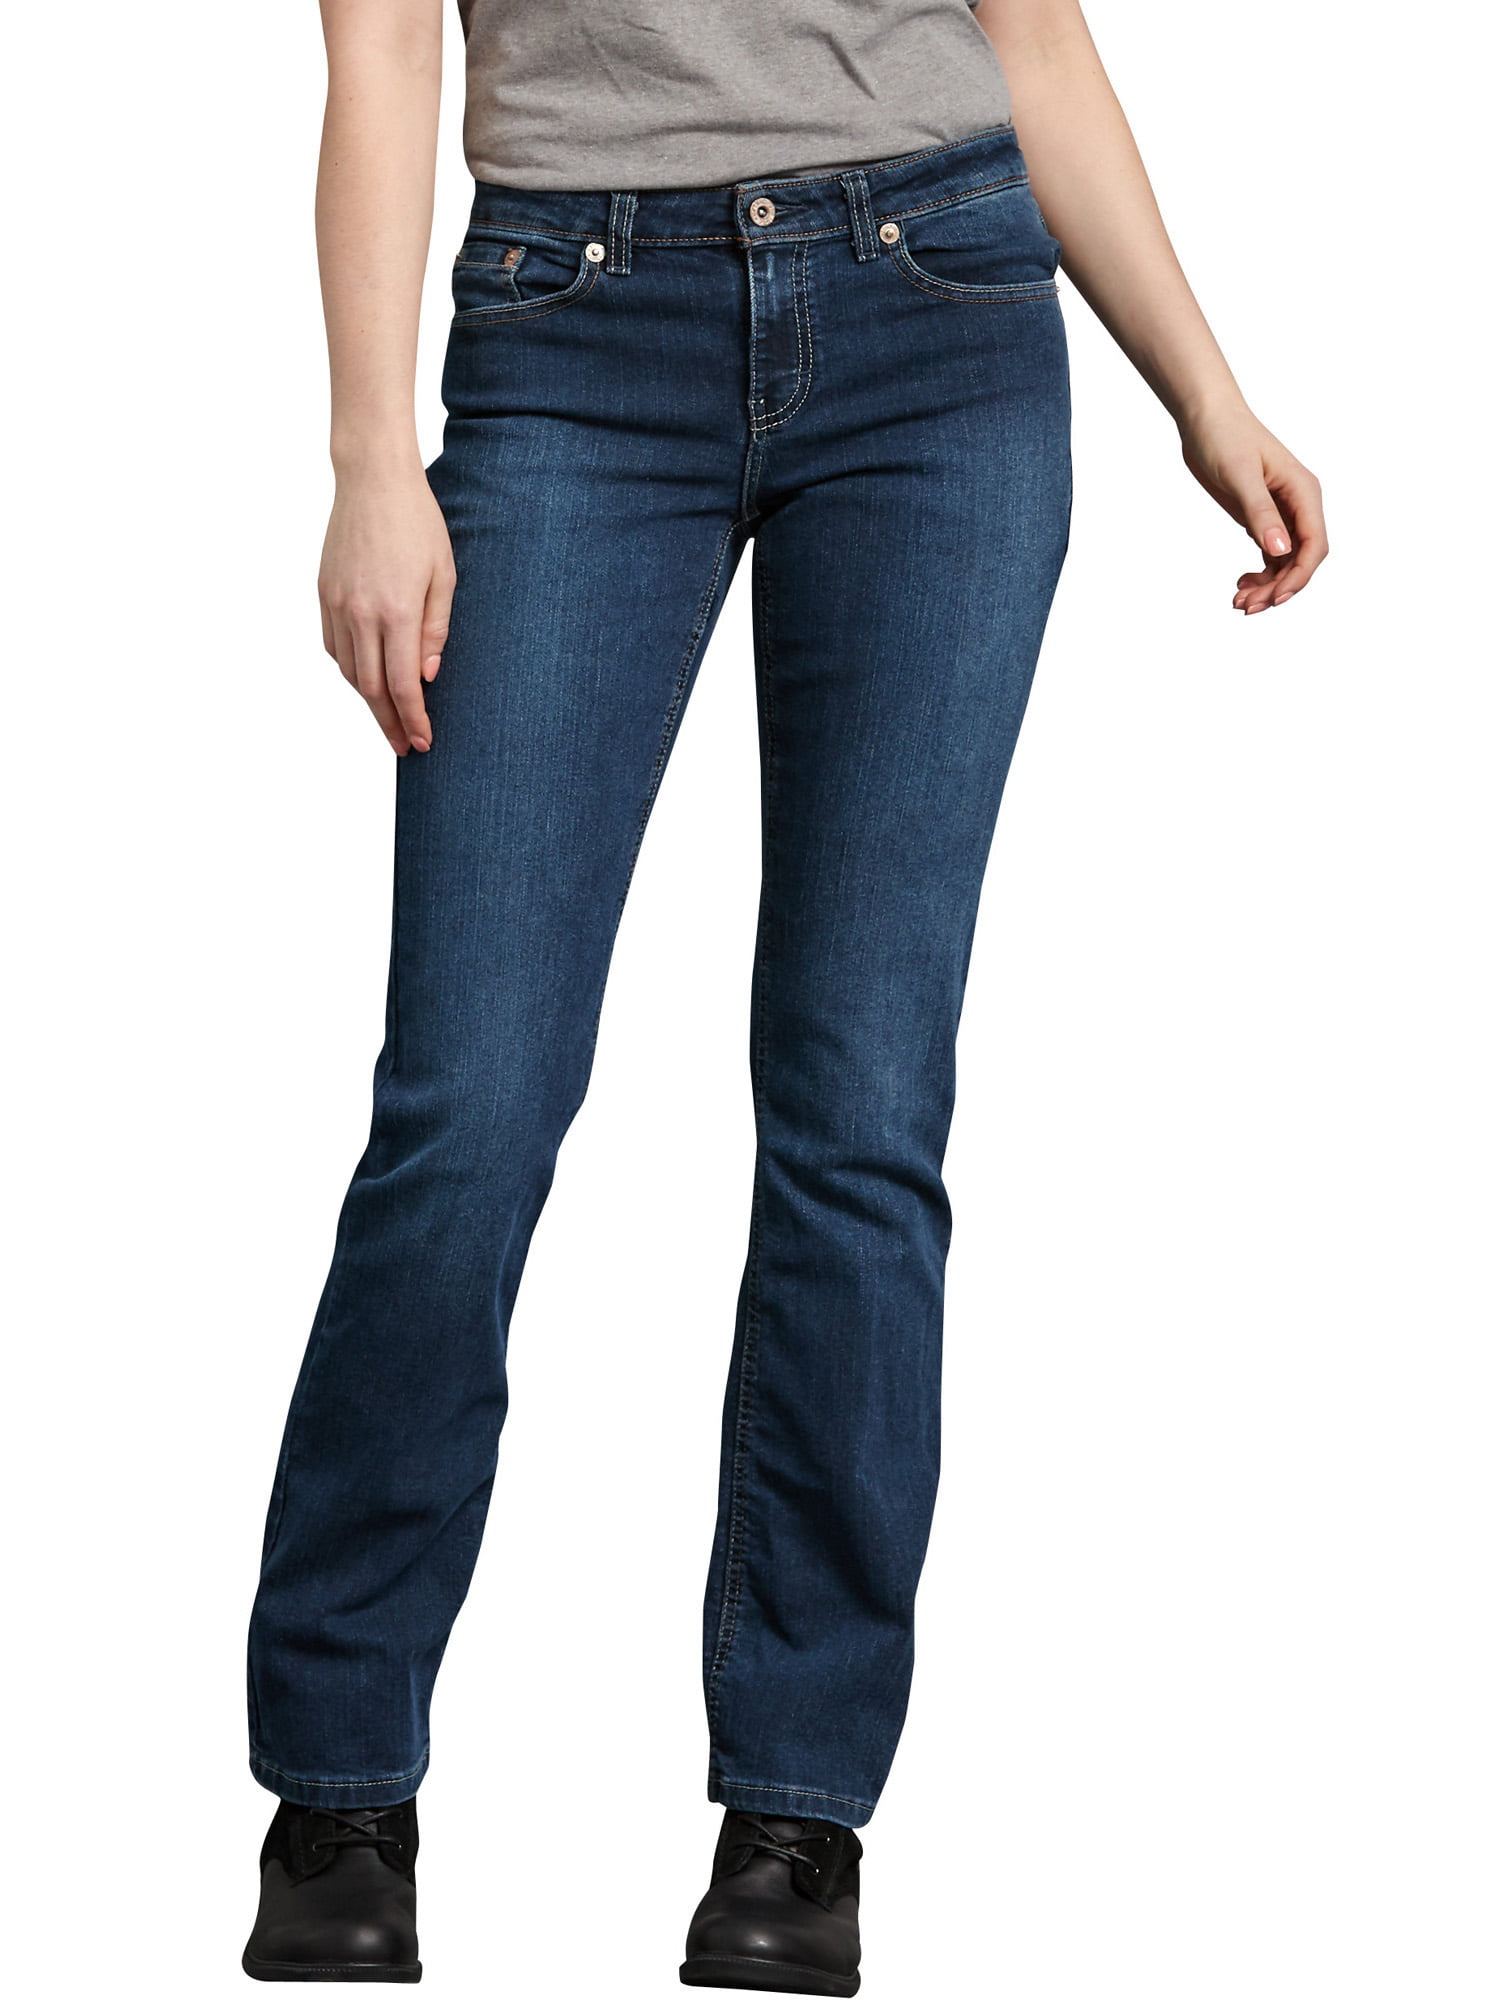 women's relaxed bootcut jeans